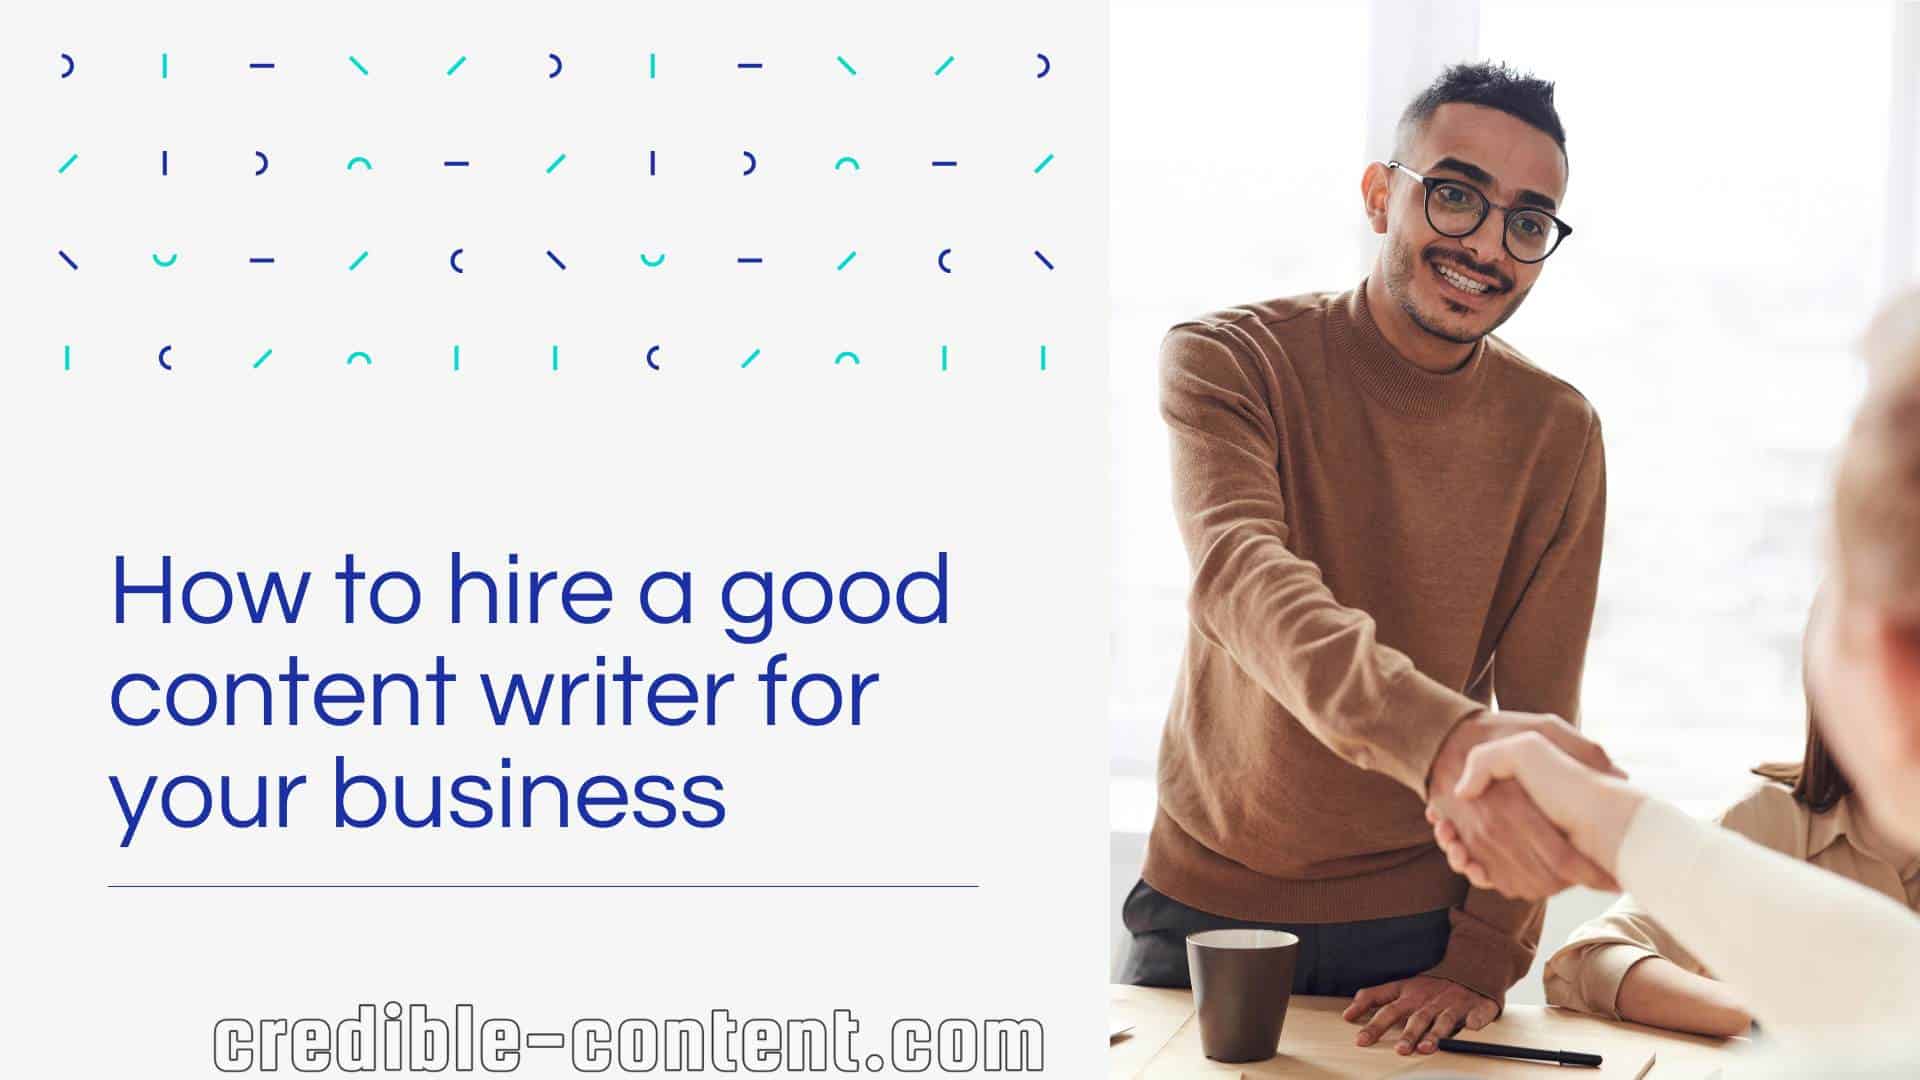 How to hire a good content writer for your business